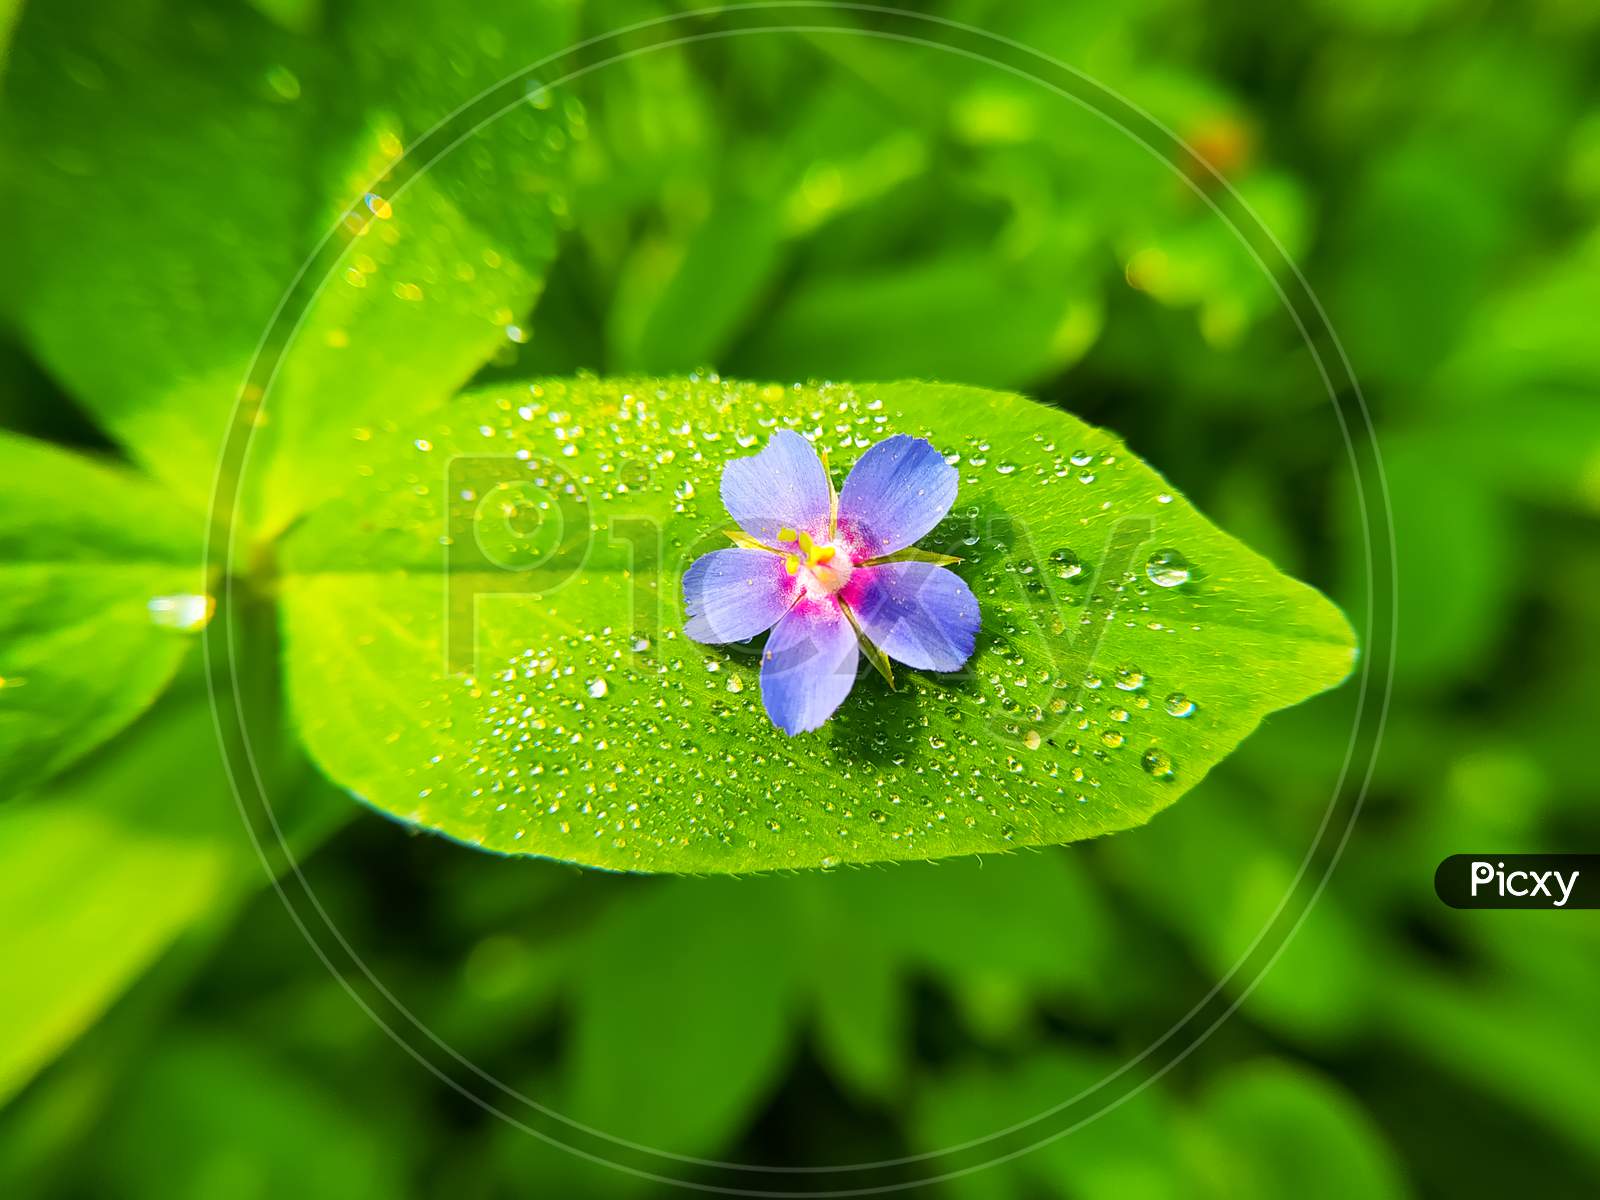 Blue Flowers With Dew Drops On Green Leaf On Blurred Background